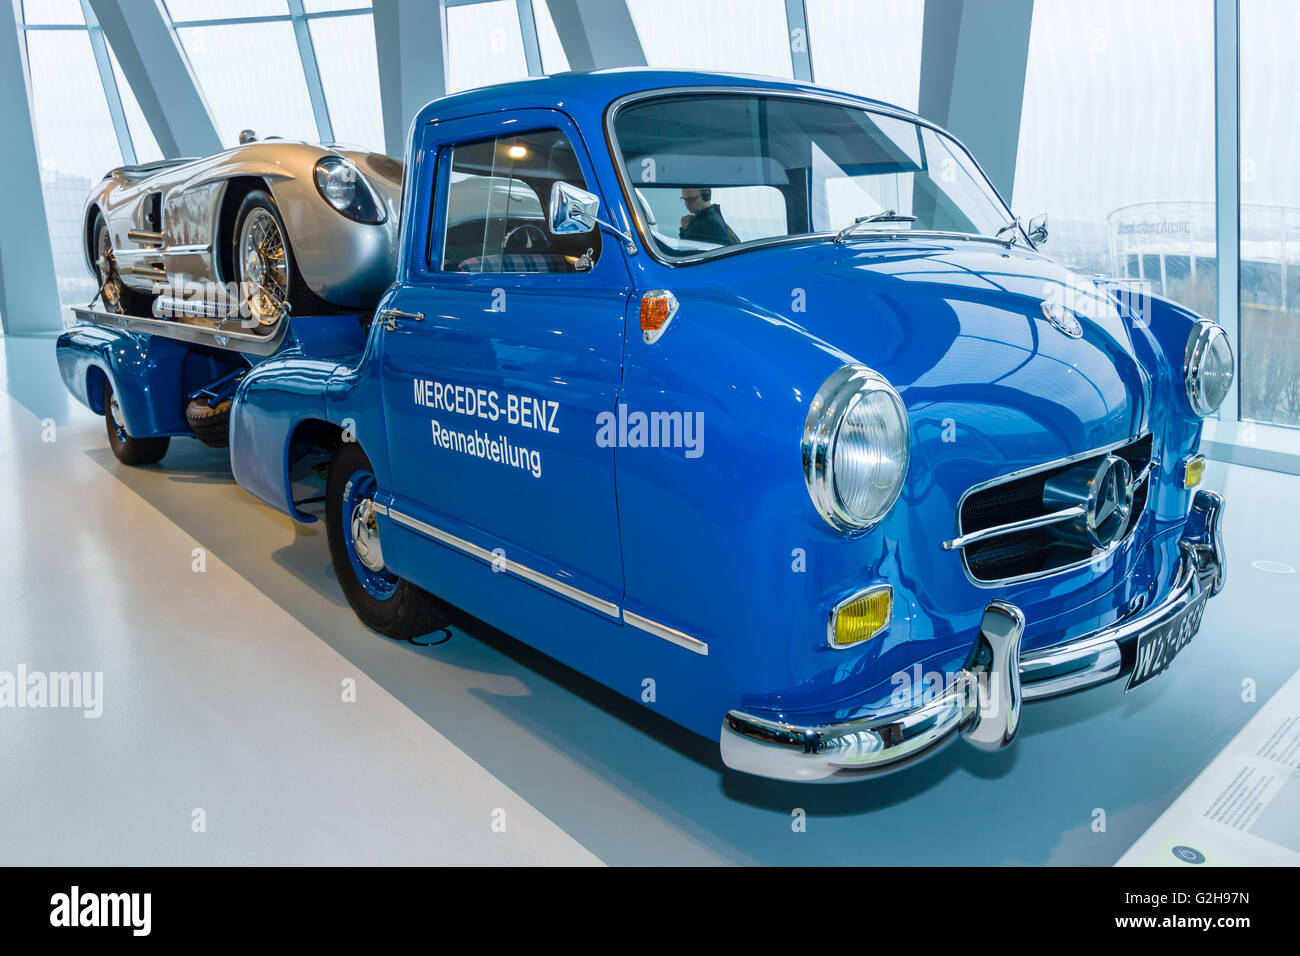 The high-speed racing car transporter Mercedes-Benz (Blue Wonder) and racing sports car Mercedes-Benz 300 SLR on the trailer. Stock Photo